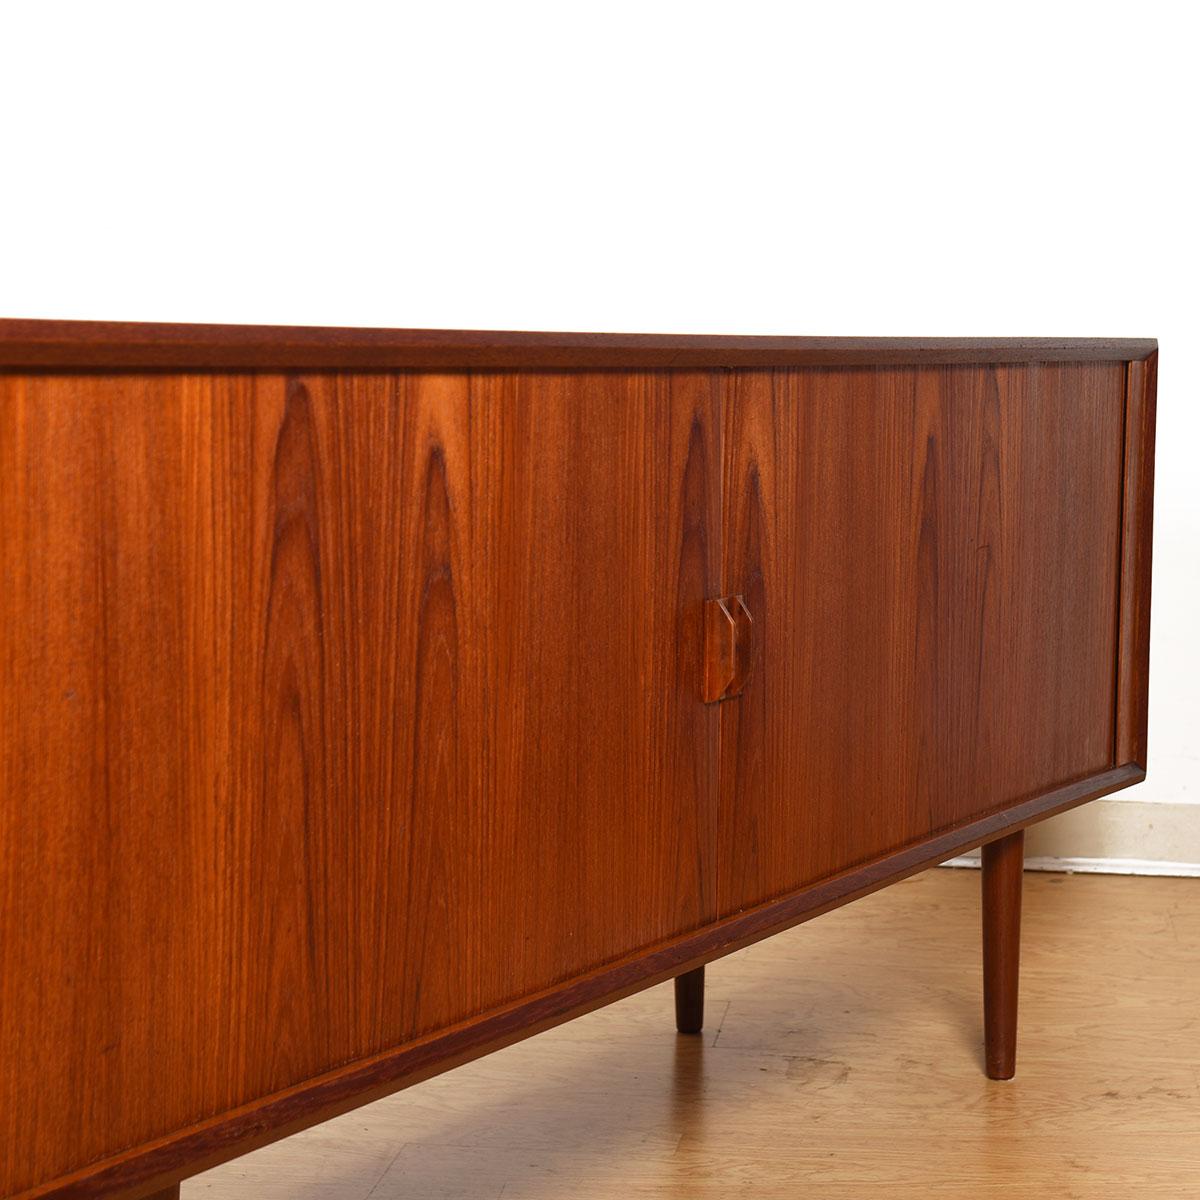 A Danish modern teak sideboard / room divider. Featuring tambour doors that slide open to reveal four felt lined drawers & two adjustable shelves.
The backside is fully finished, allowing it to be placed in the middle of a room.